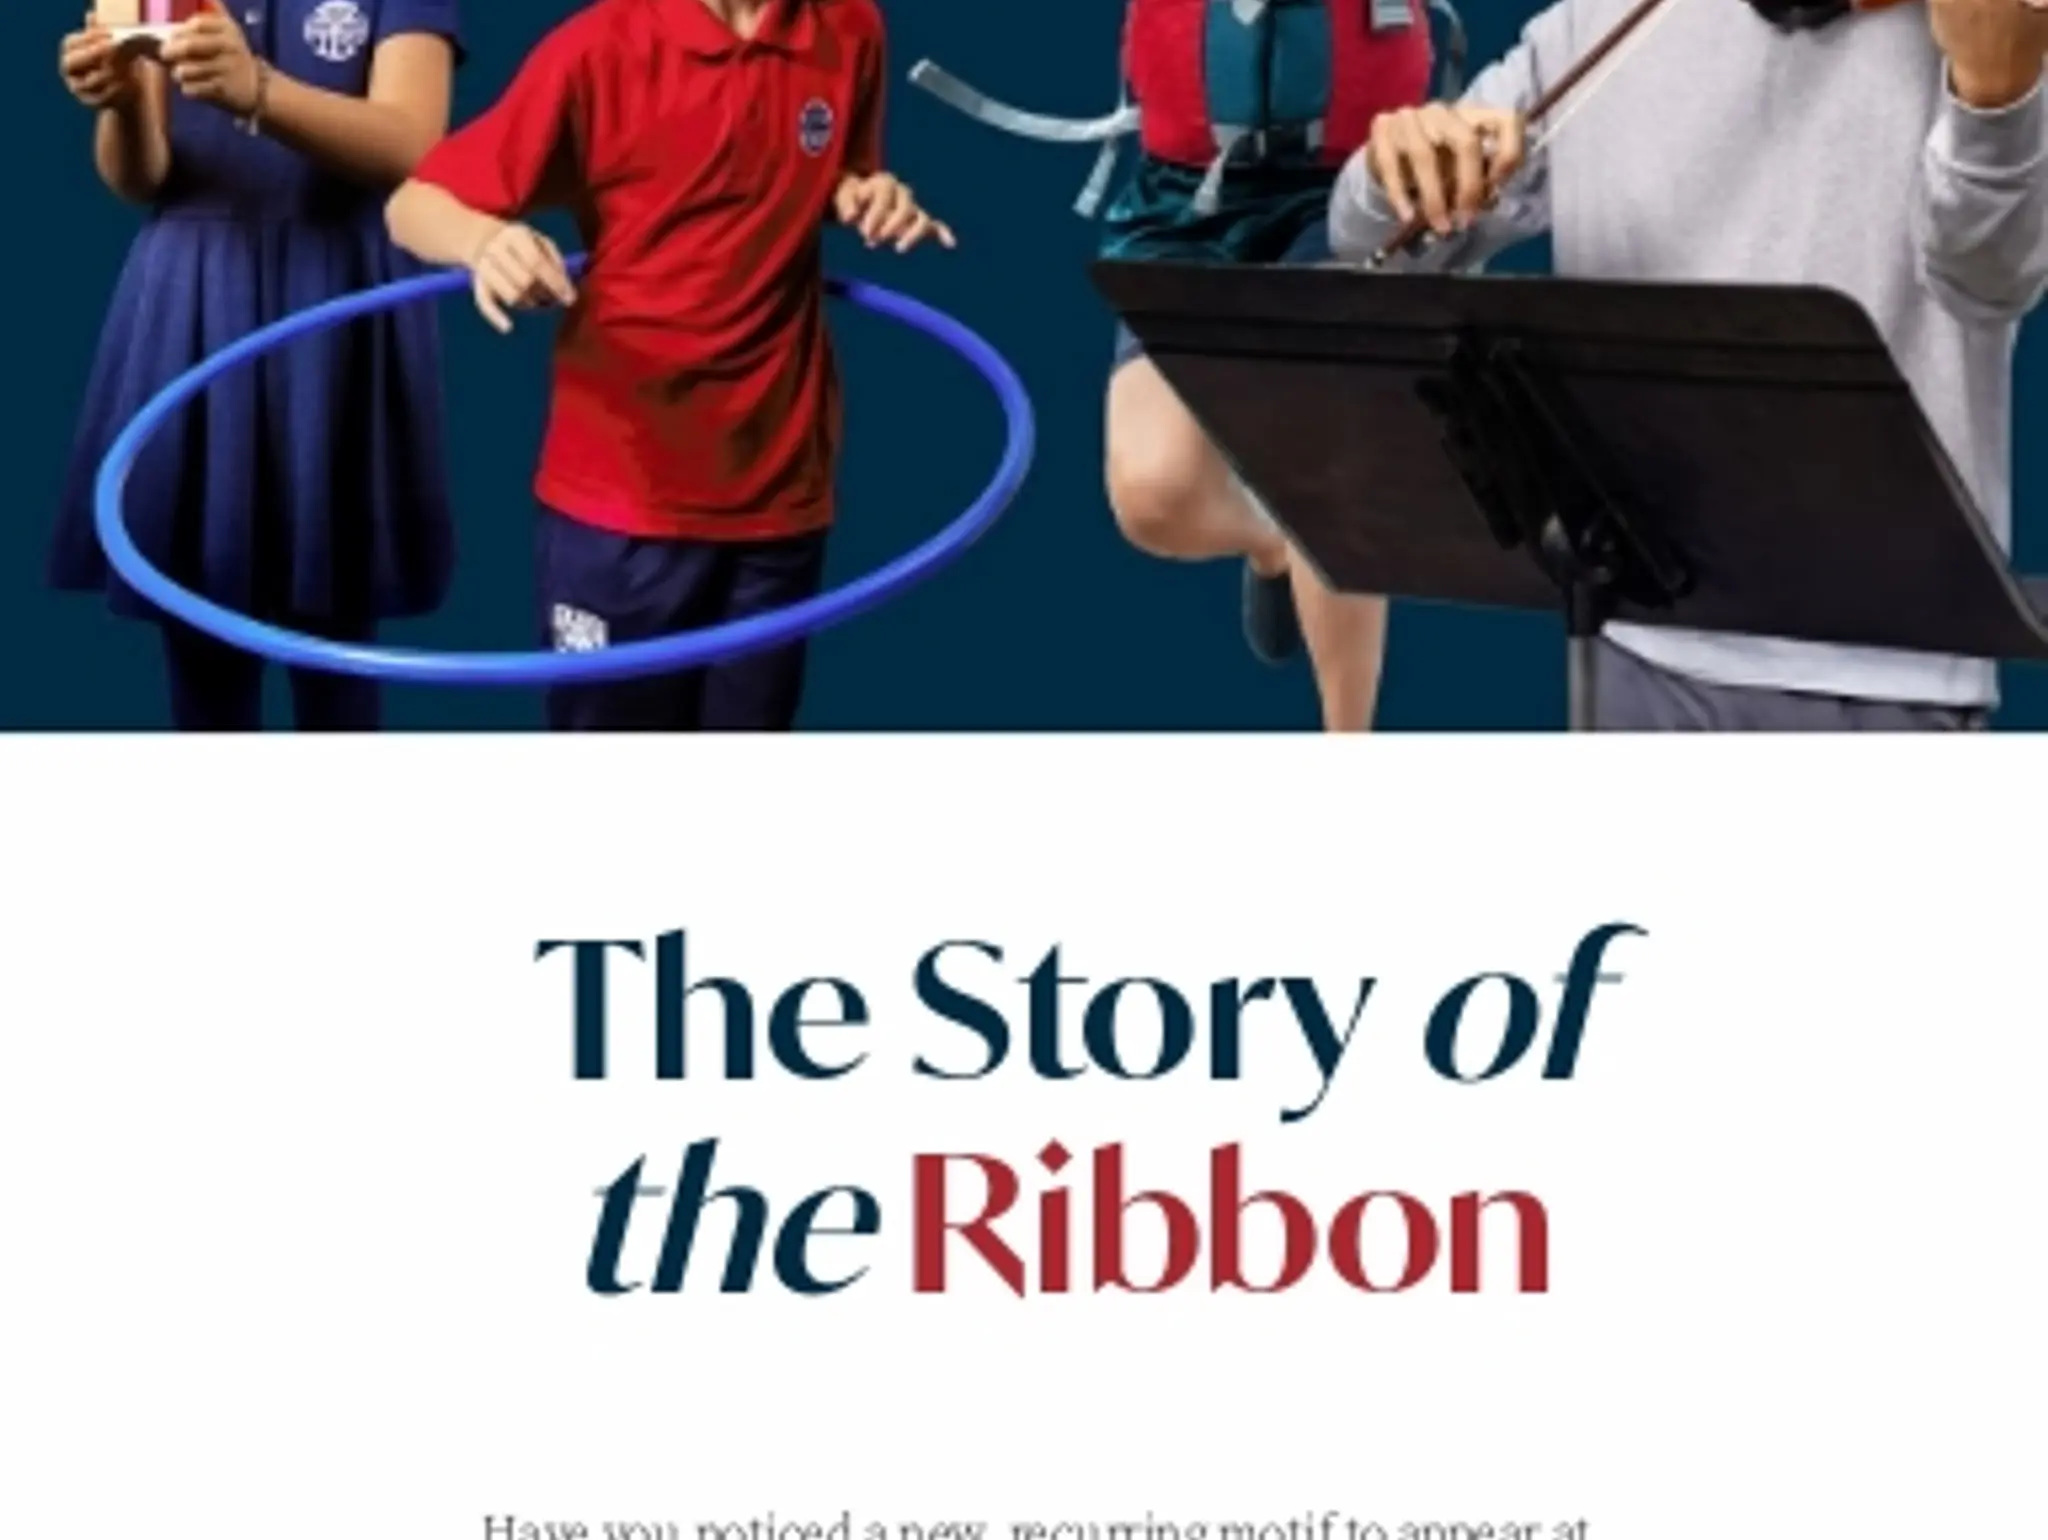 The Story of the Ribbon